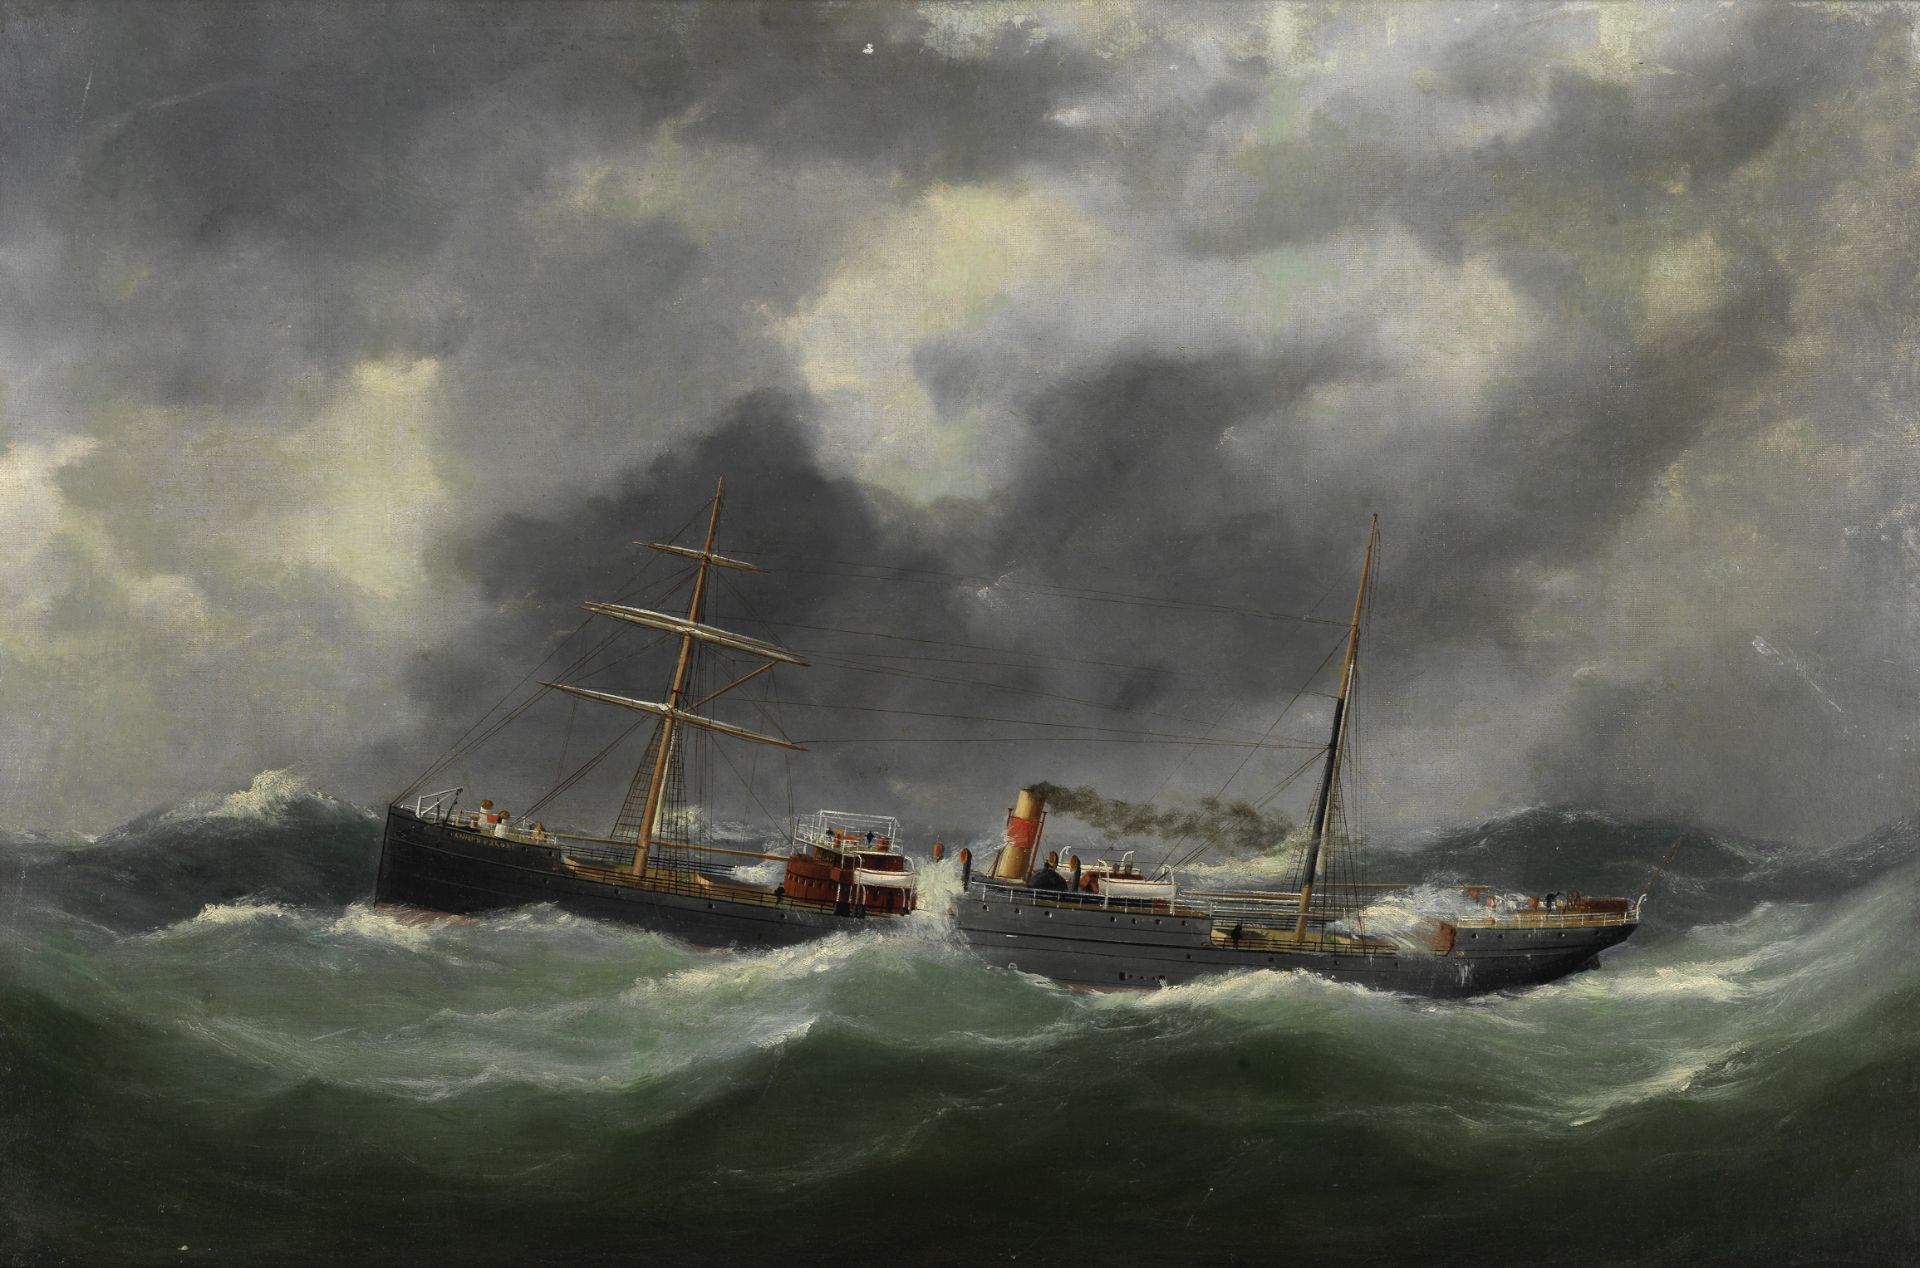 Attributed to &#201;douard Adam (French, 1847-1929) The cargo ship Knight Errant in a stormy sea